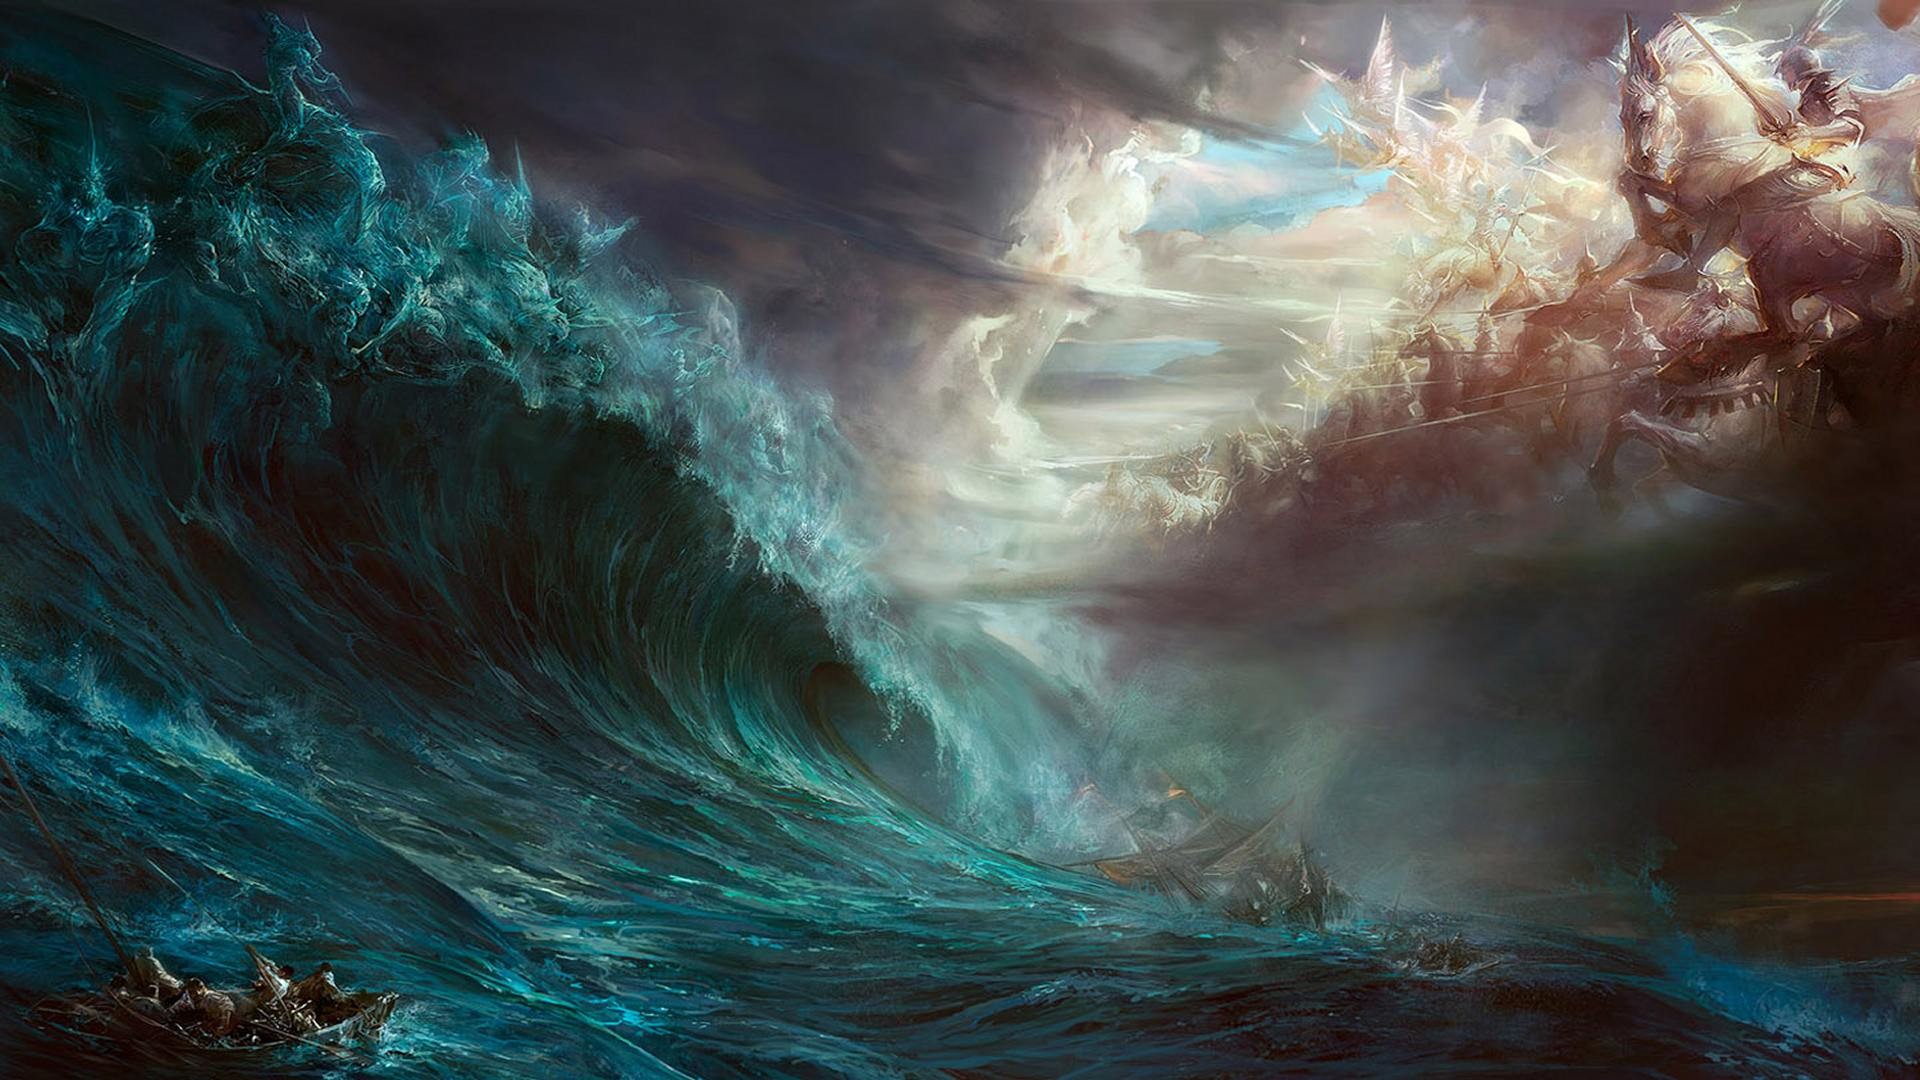 1920x1080 Explore Stormy Sea, Desktop Wallpapers, and more!